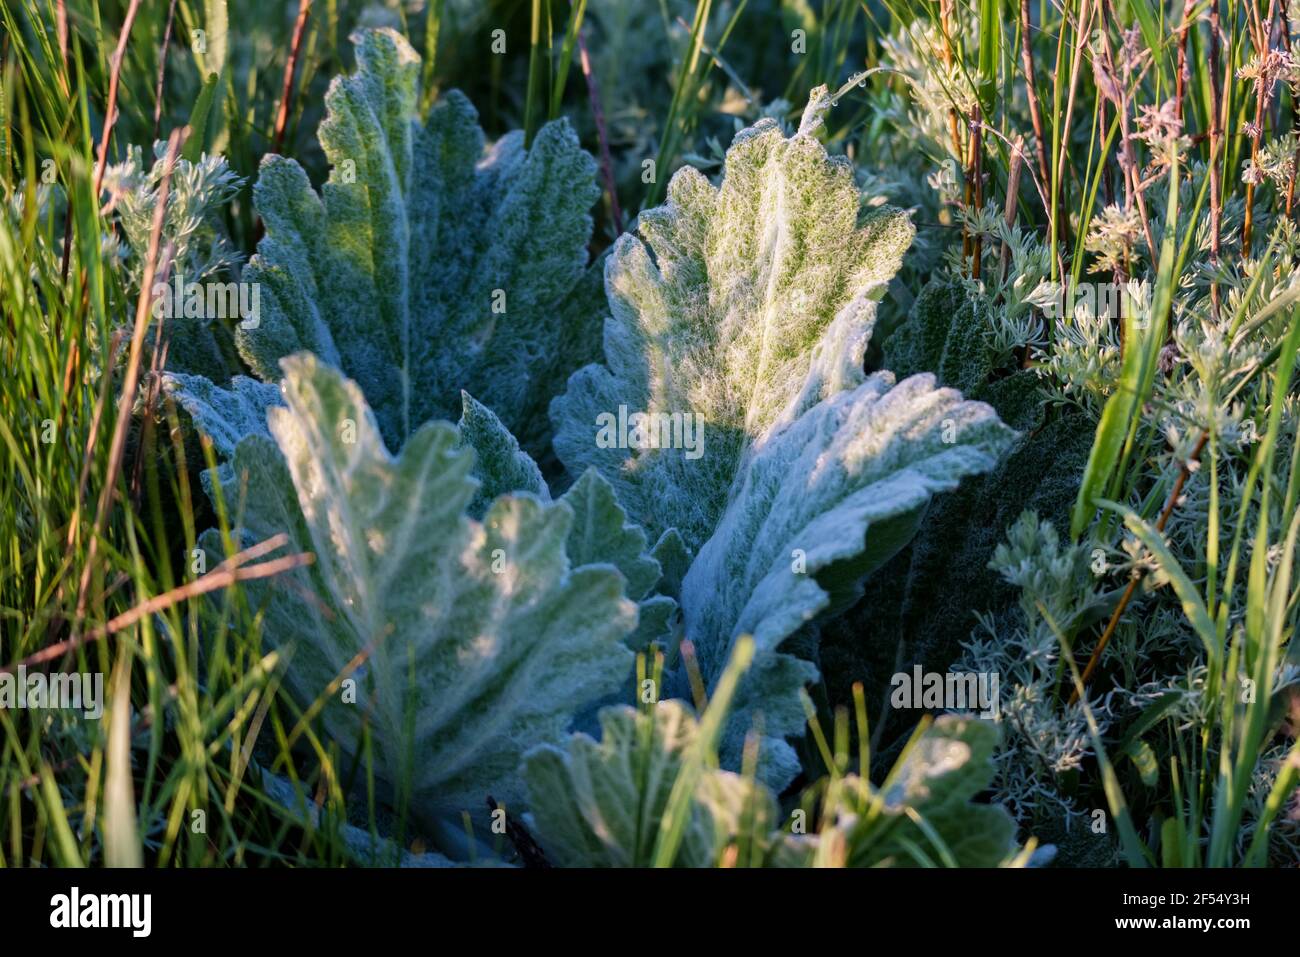 Shaggy large leaves of the plant Ethiopian sage or Salvia aethiopis, growing in the green meadow. Selective focus Stock Photo